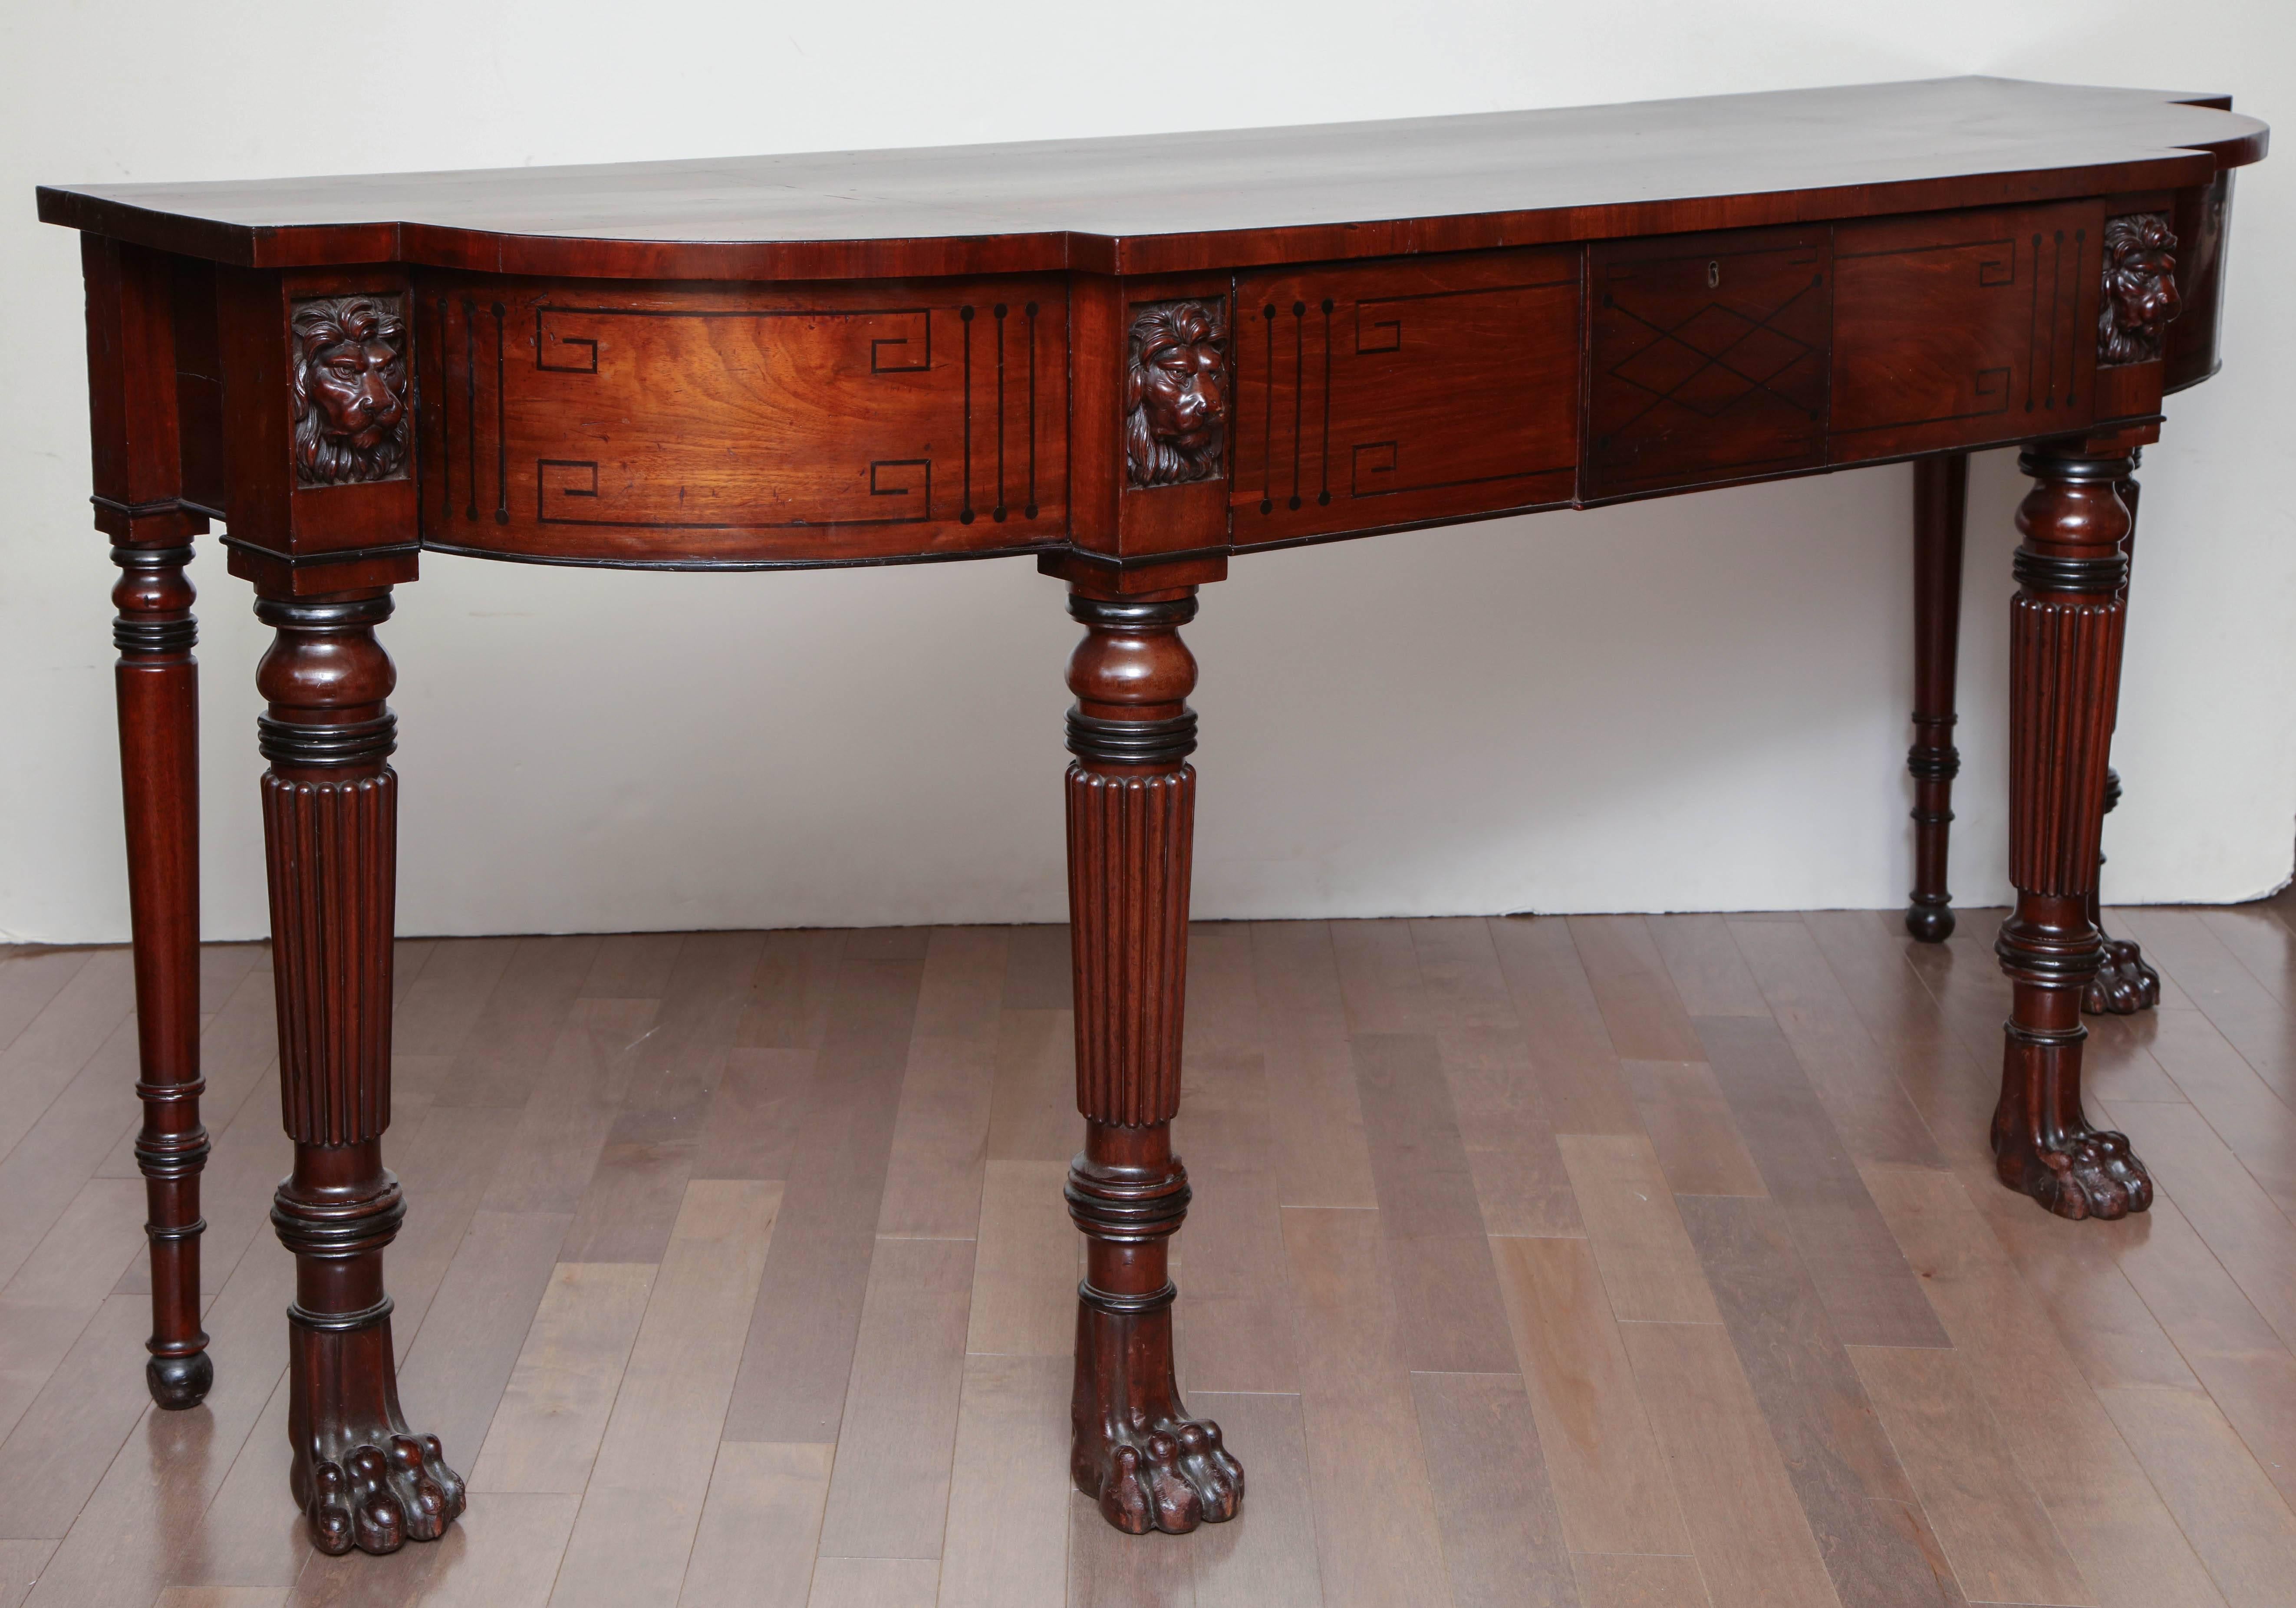 Early 19th century English regency, mahogany serving table or console, with drawer.